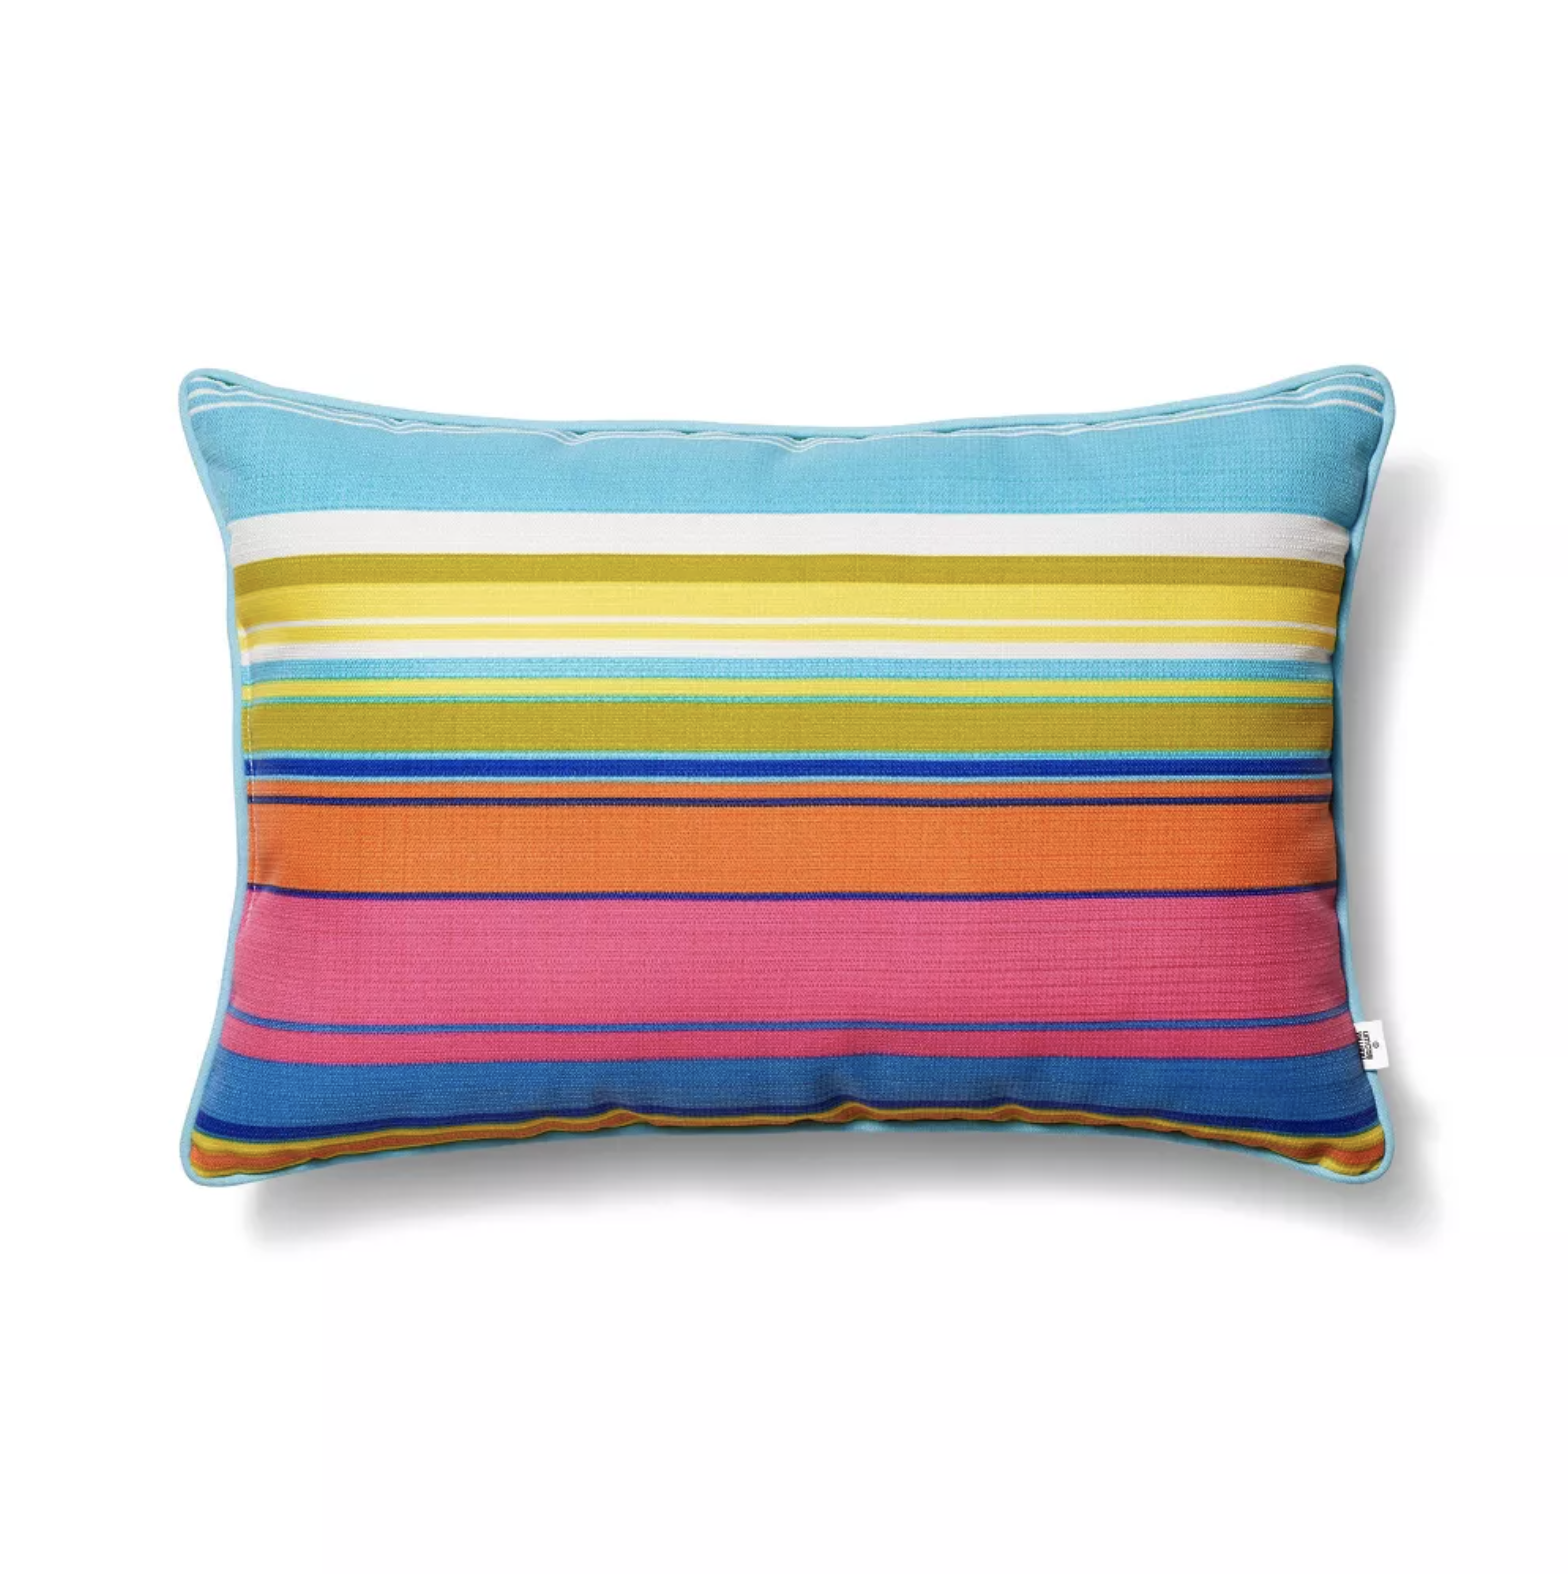 Colorful striped pillow